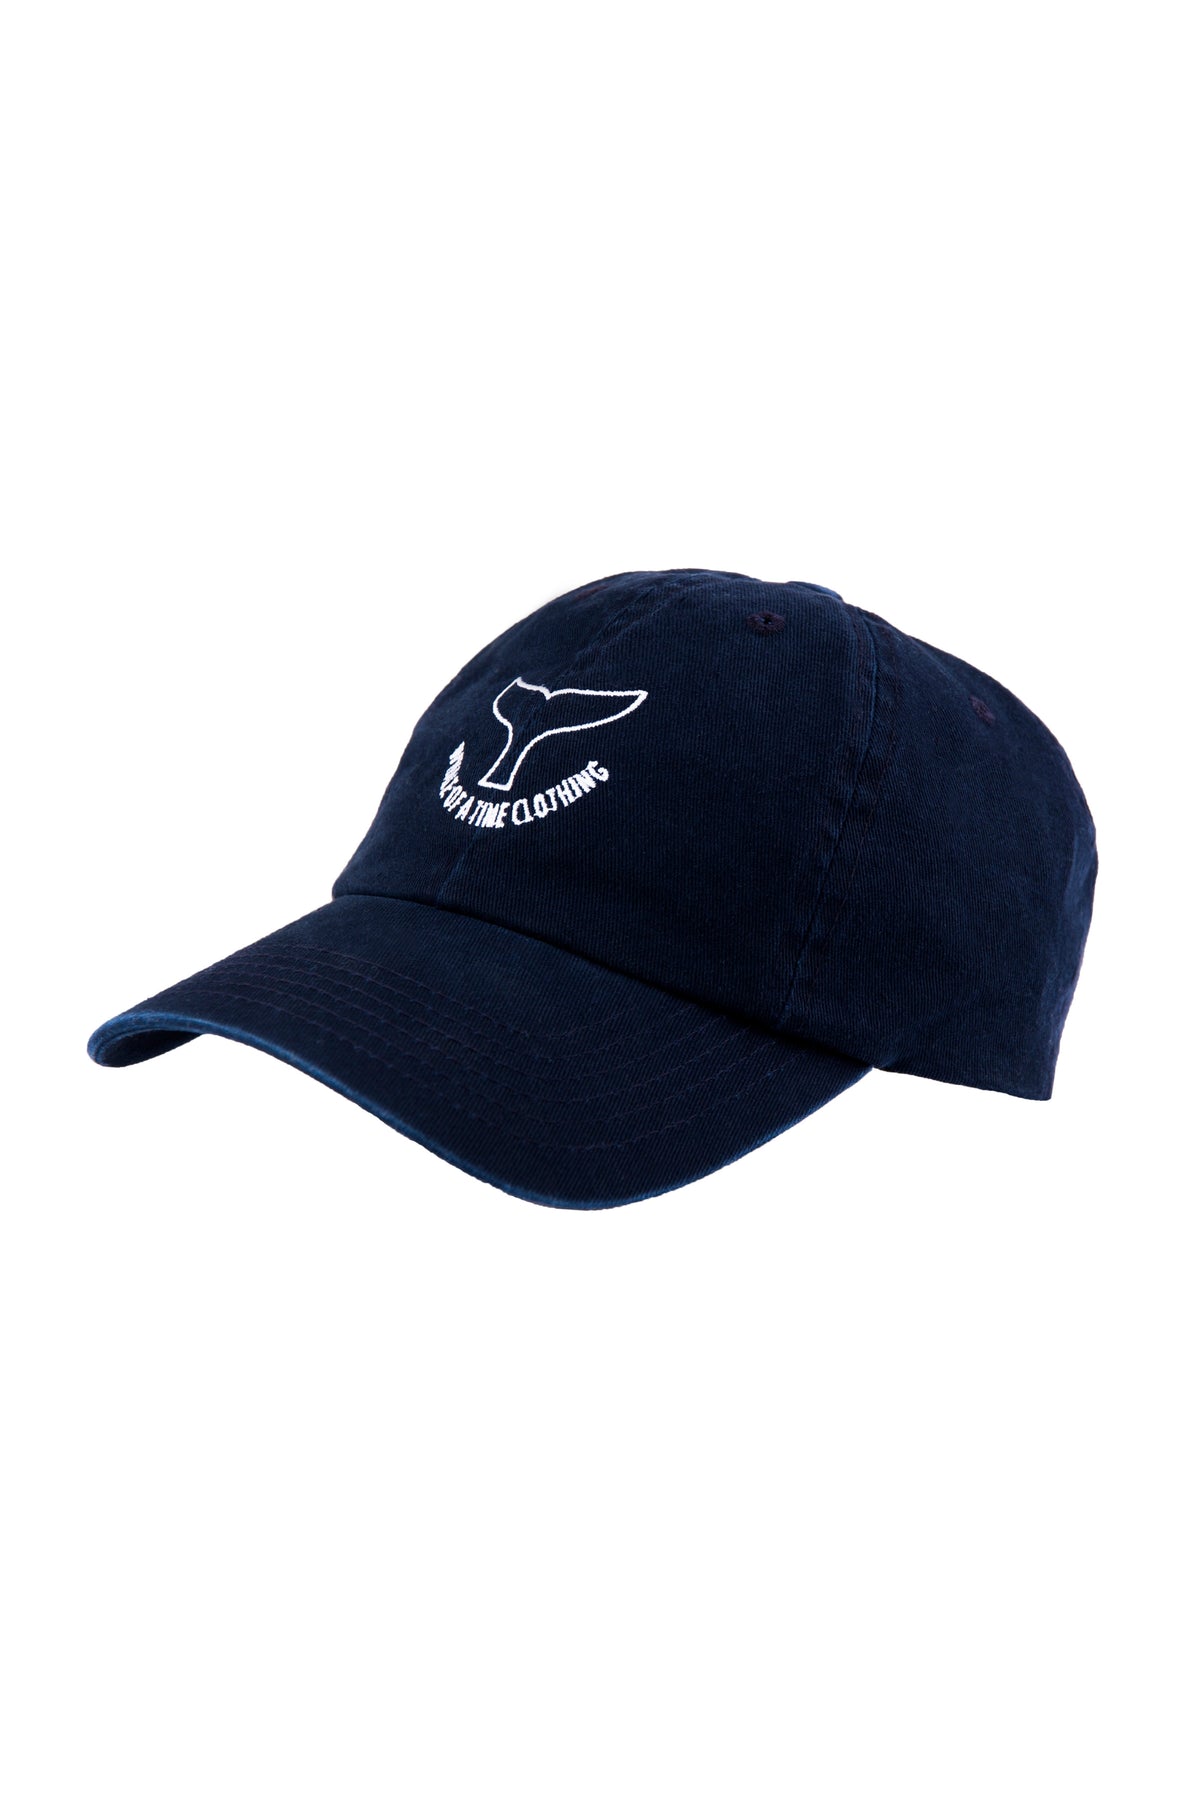 Stonewashed Cap - Navy - Whale Of A Time Clothing